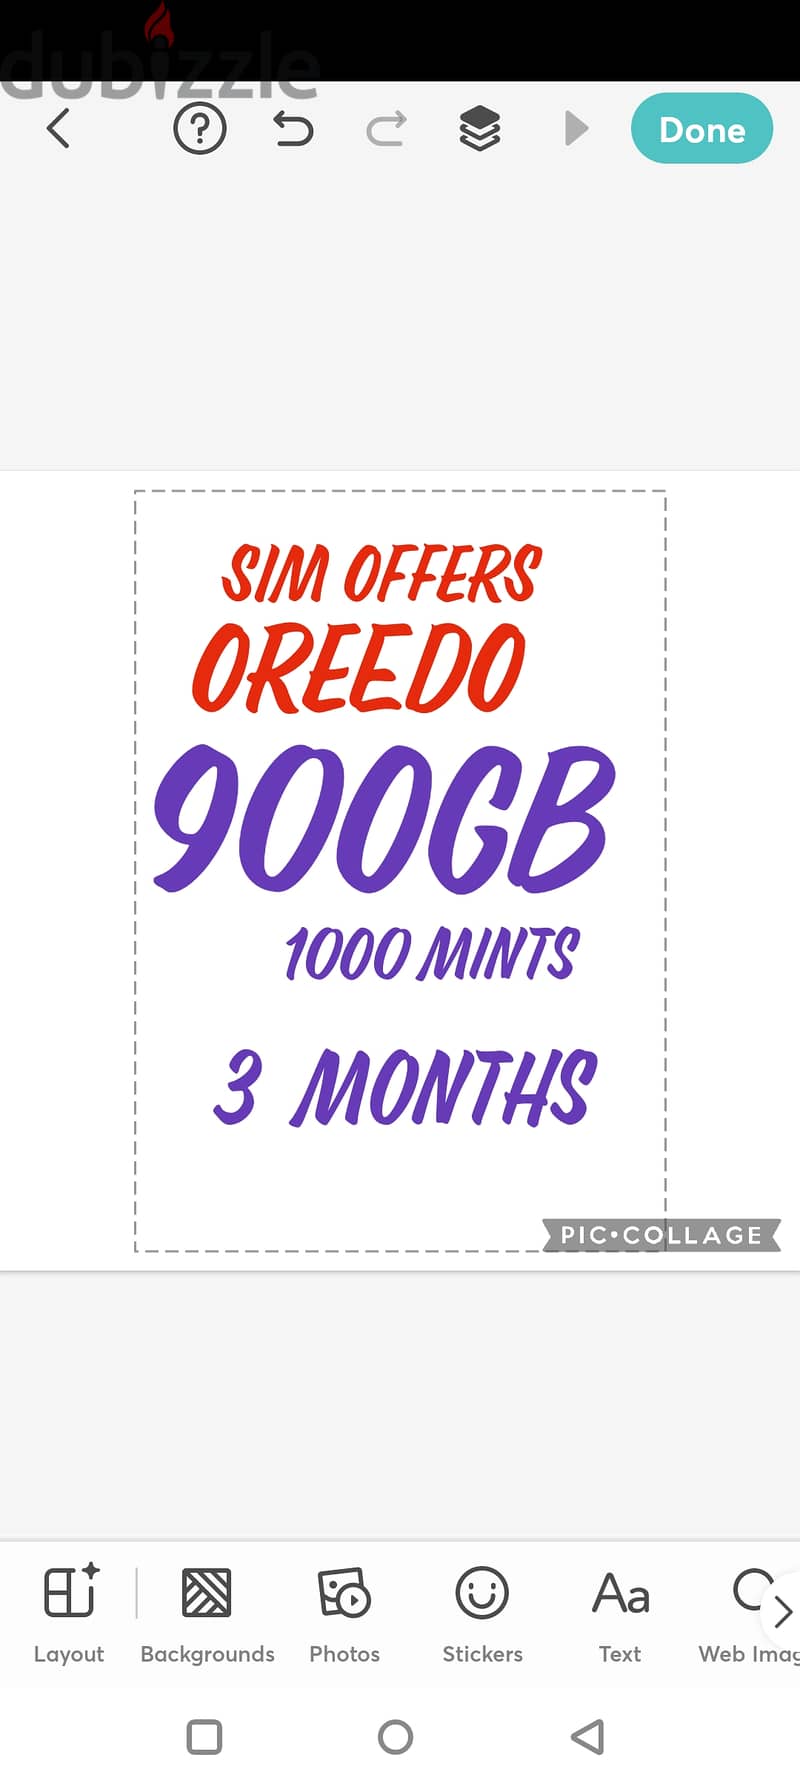 Sim cards offers 3 months 900gb 1000 mints oreedo and stc 1